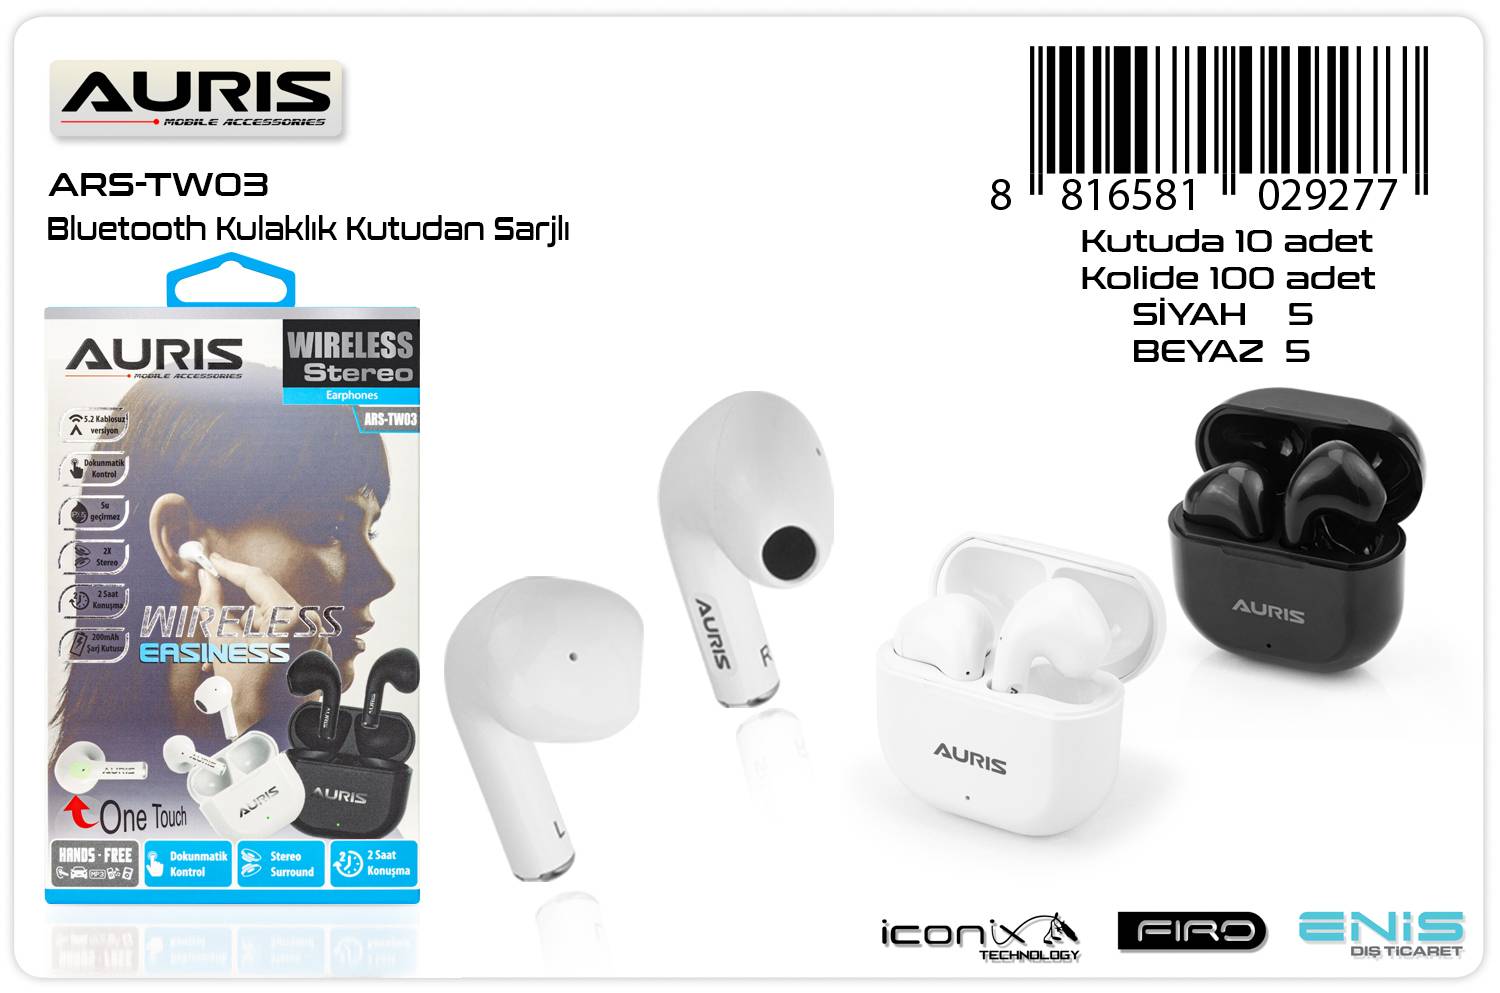 TW03/Airpods AURIS WARRANTY QUALIY UP TO 1 MOUNTH